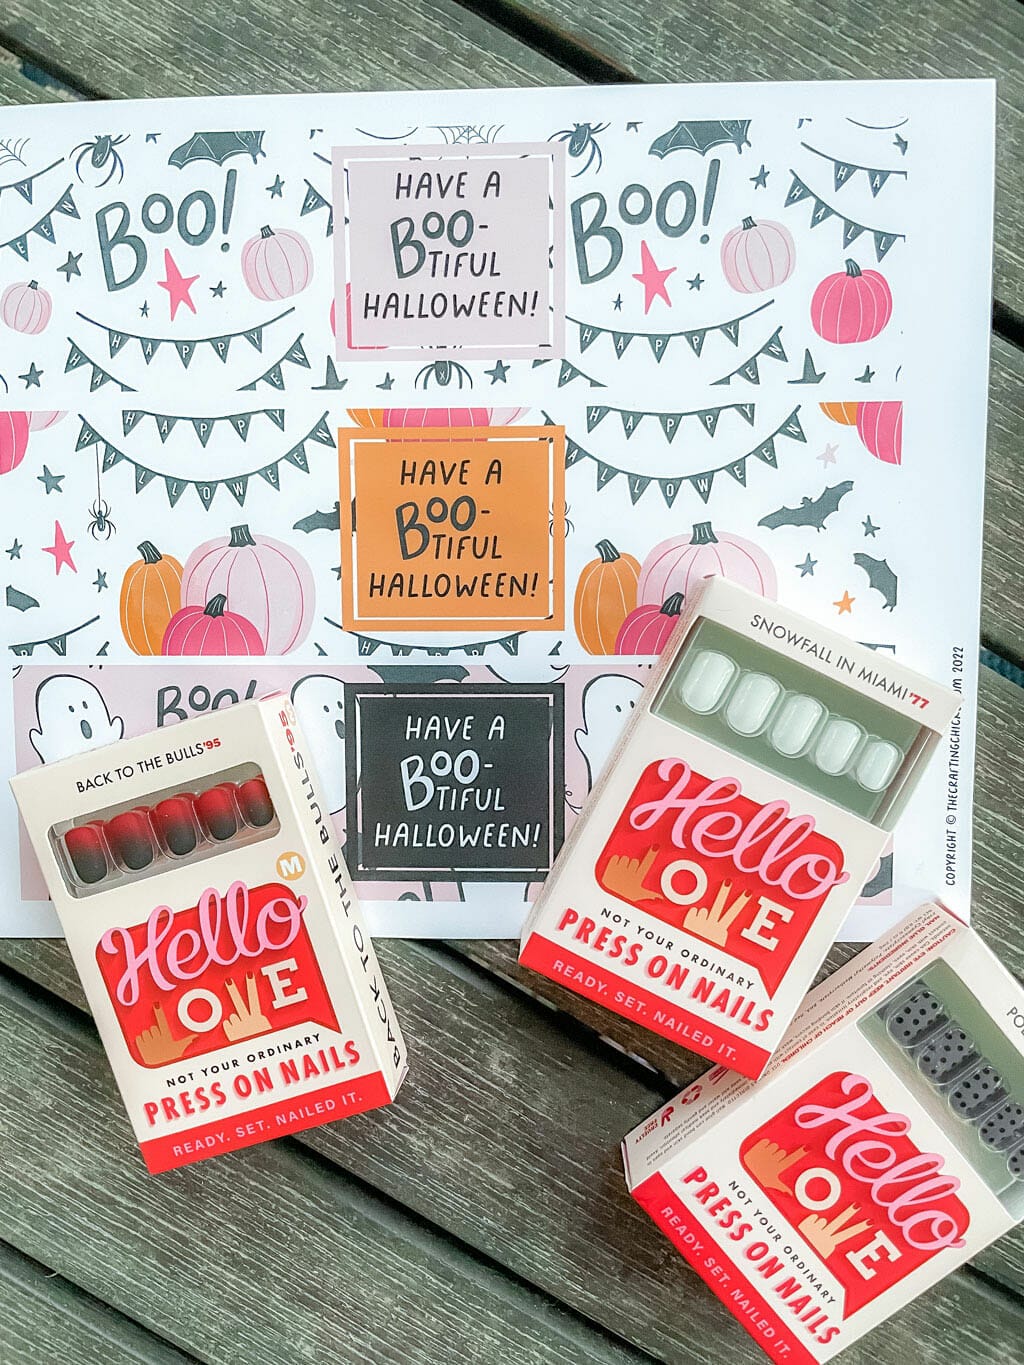 Halloween Printable gift tags in background with 3 boxes of Hello Love Inc. Nails